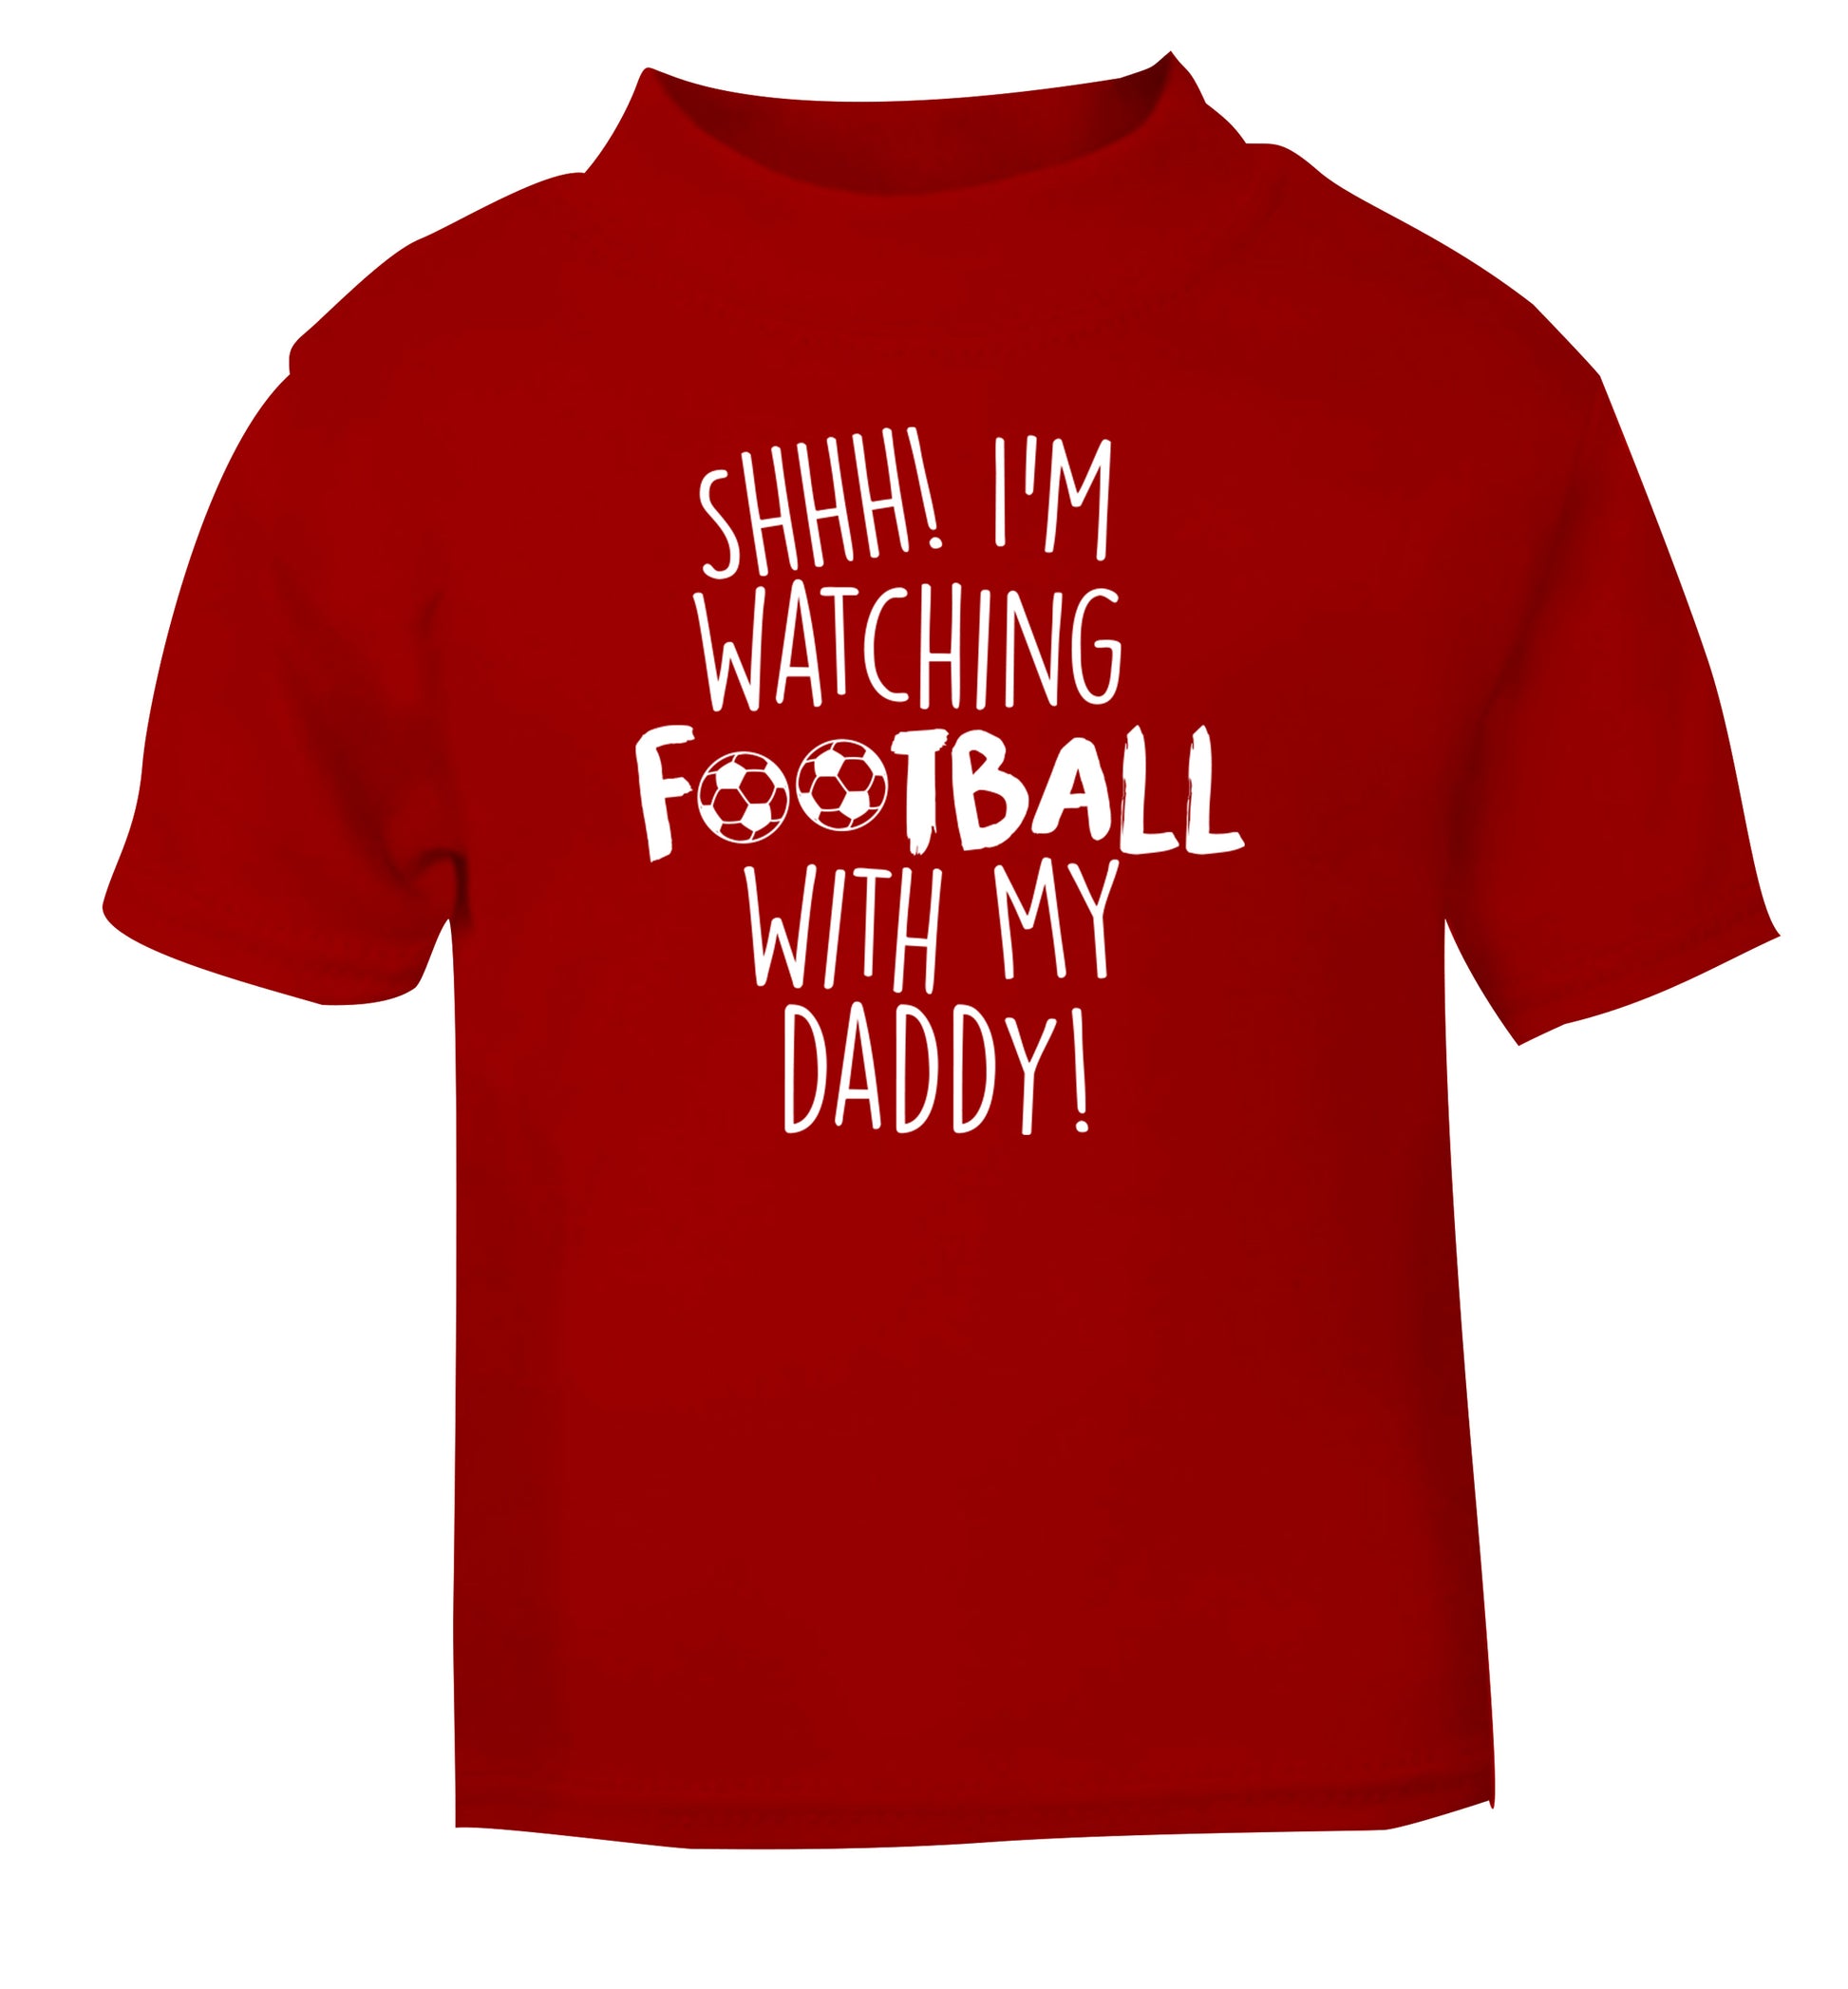 Shhh I'm watching football with my daddy red Baby Toddler Tshirt 2 Years